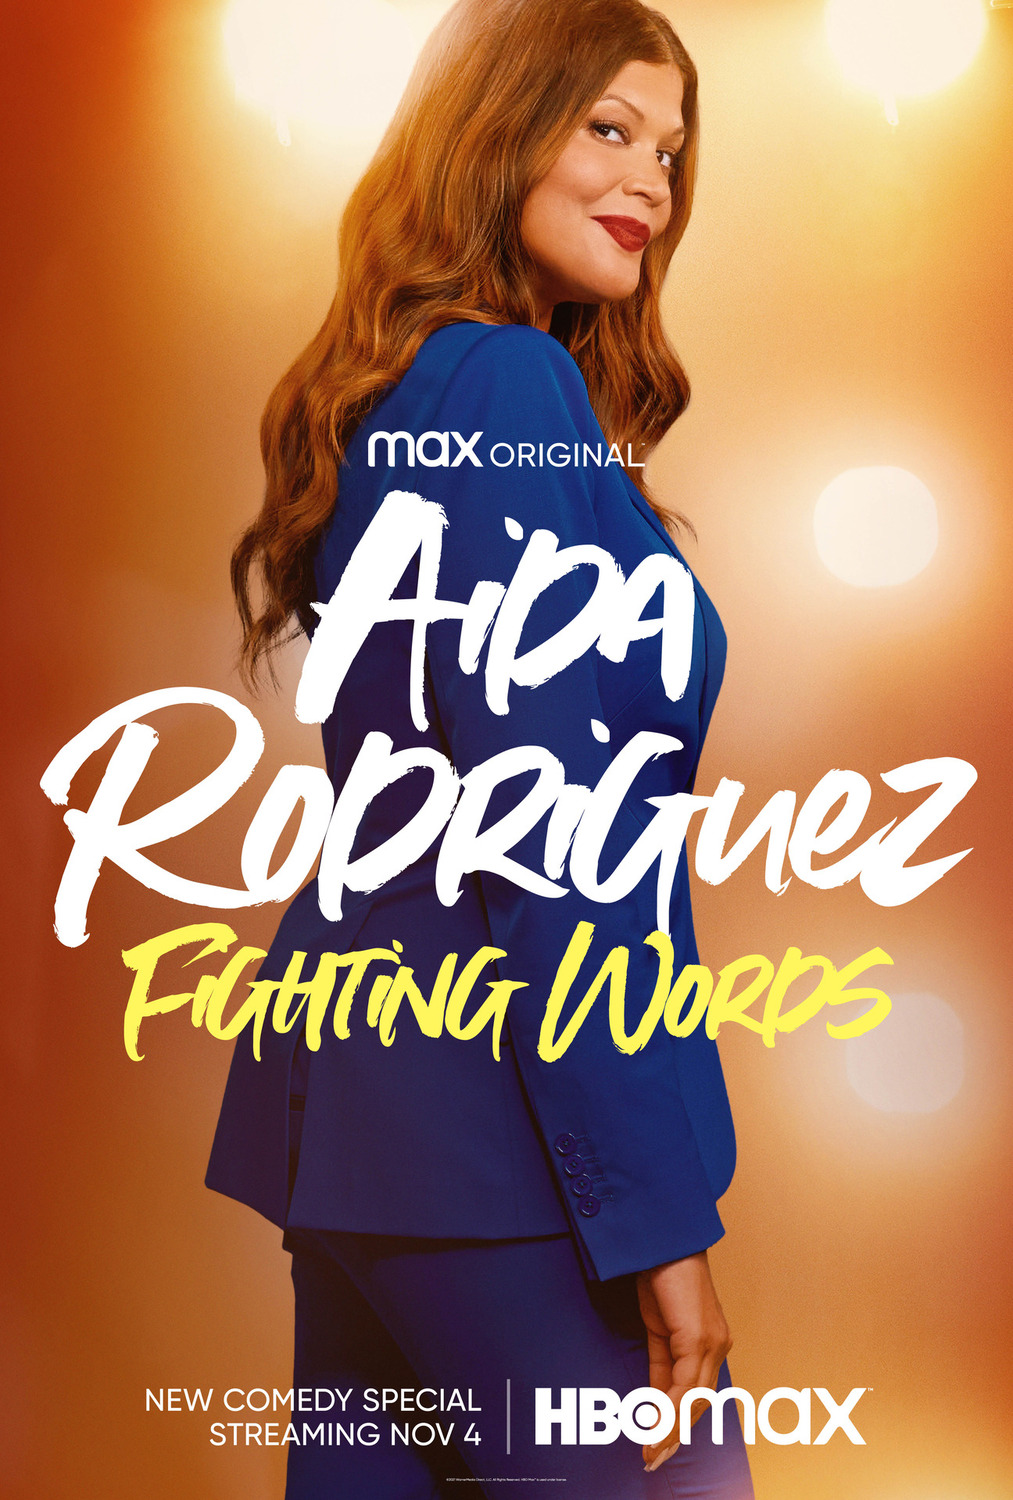 Extra Large TV Poster Image for Aida Rodriguez: Fighting Words 